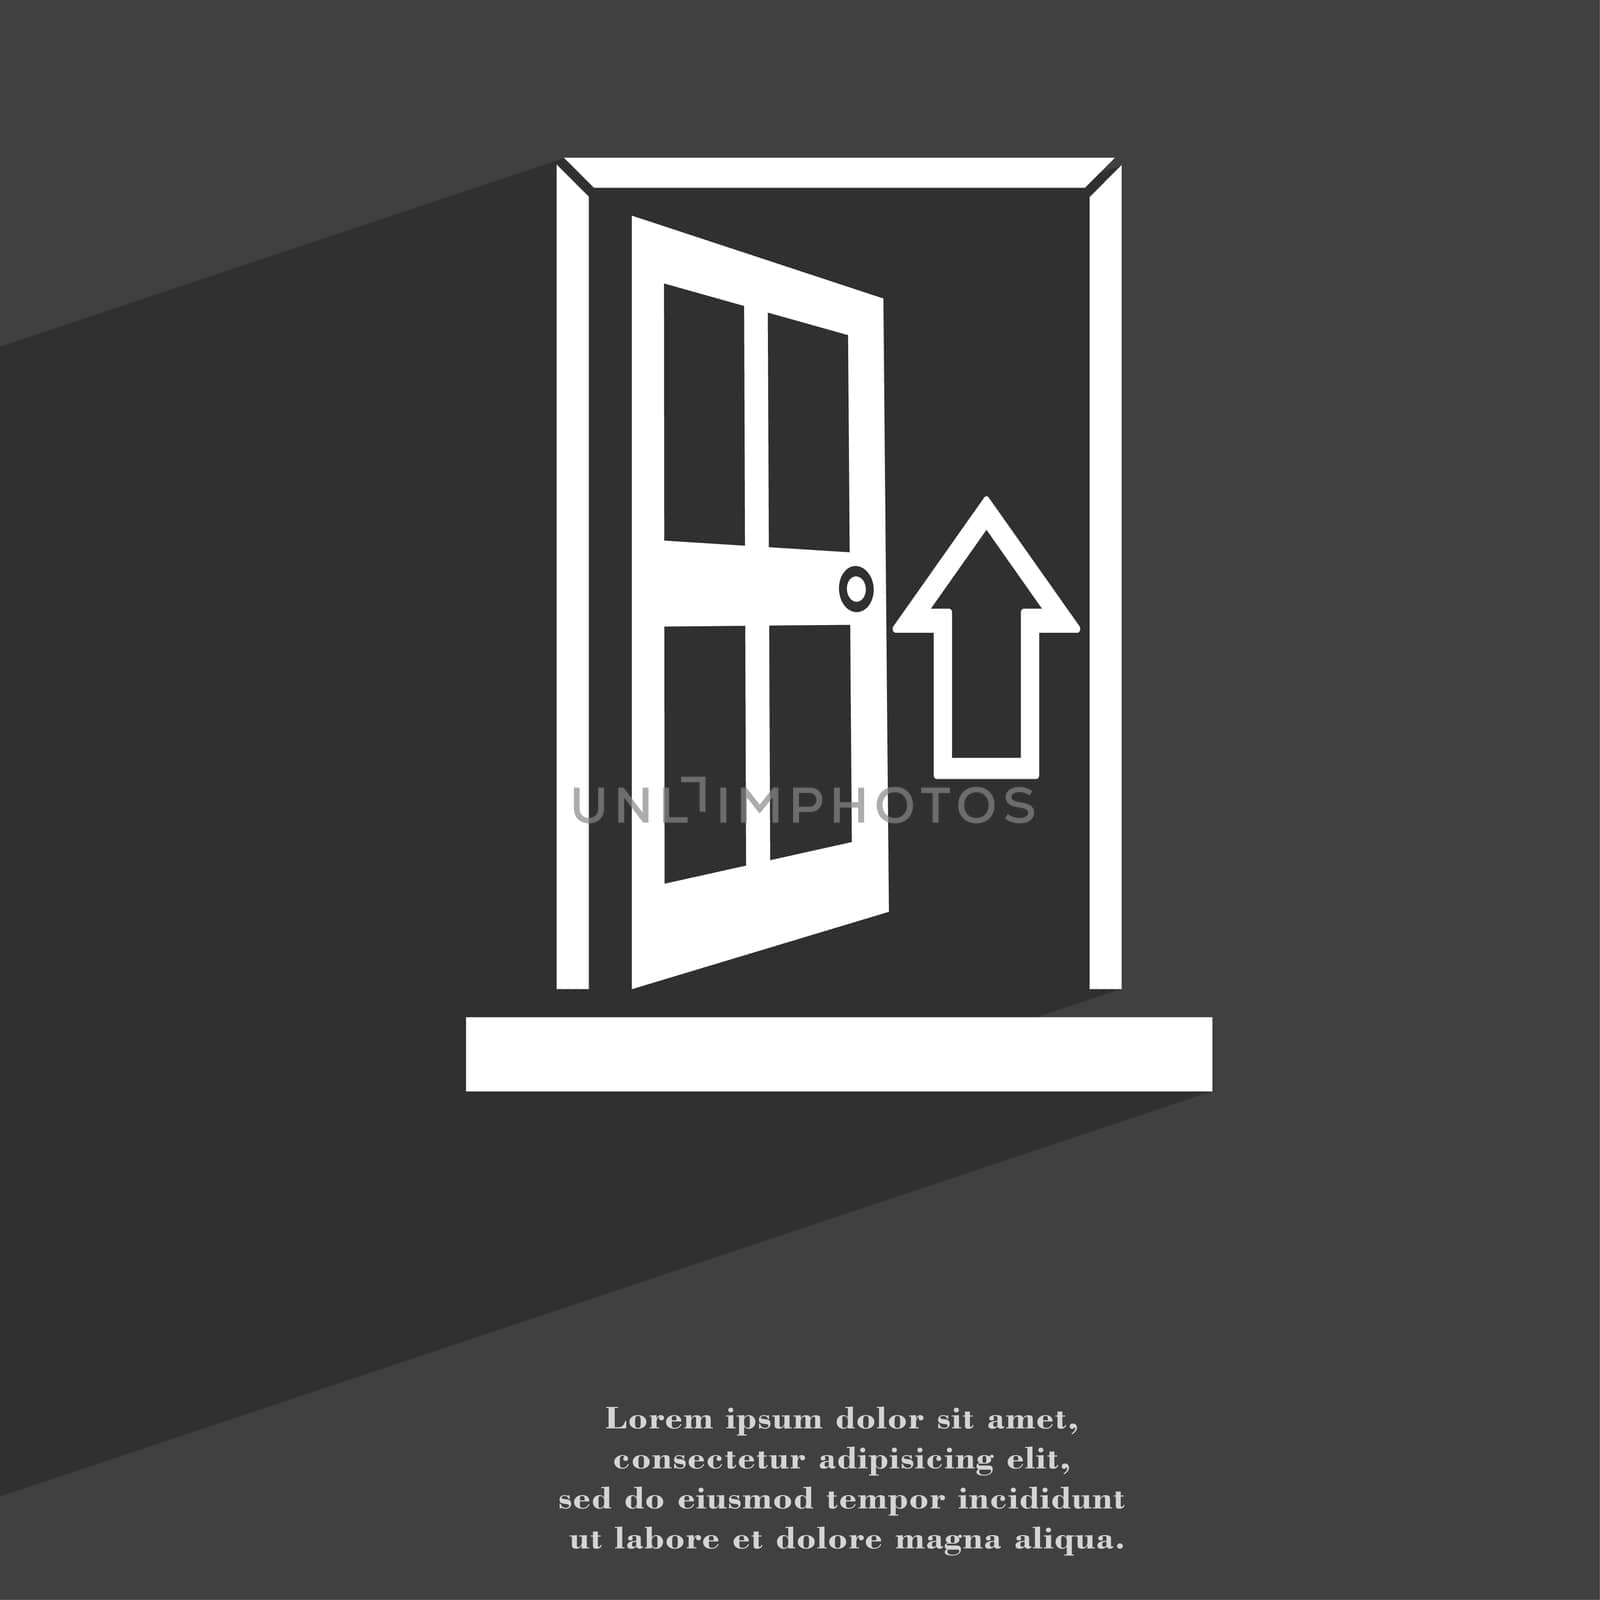 Door, Enter or exit icon symbol Flat modern web design with long shadow and space for your text. illustration